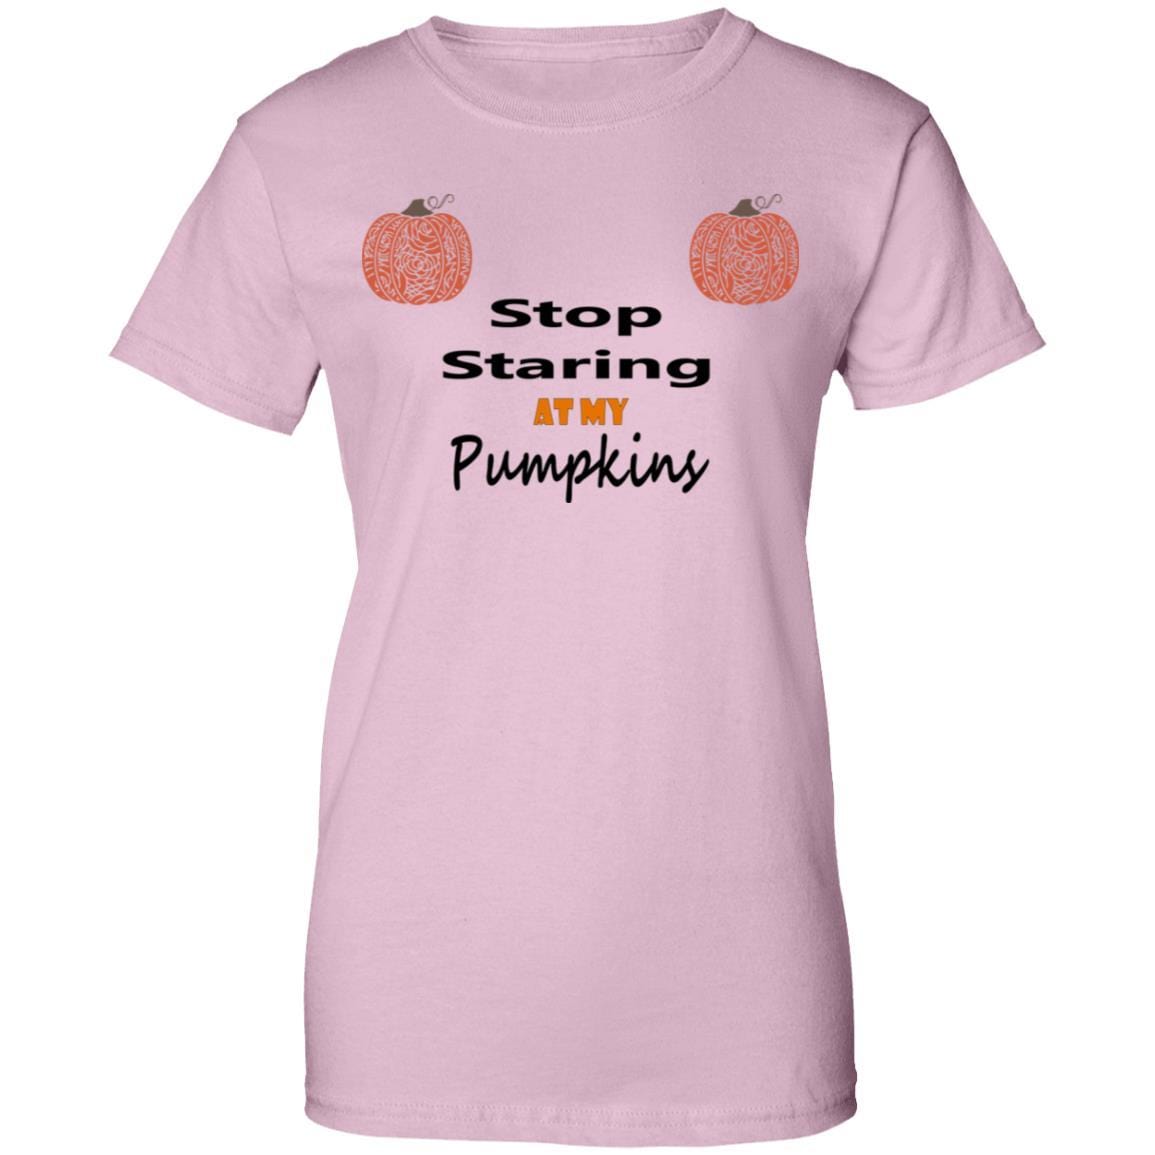 T-Shirts Light Pink / X-Small WineyBitches.Co "Stop Staring At My Pumpkins" Ladies' 100% Cotton T-Shirt WineyBitchesCo